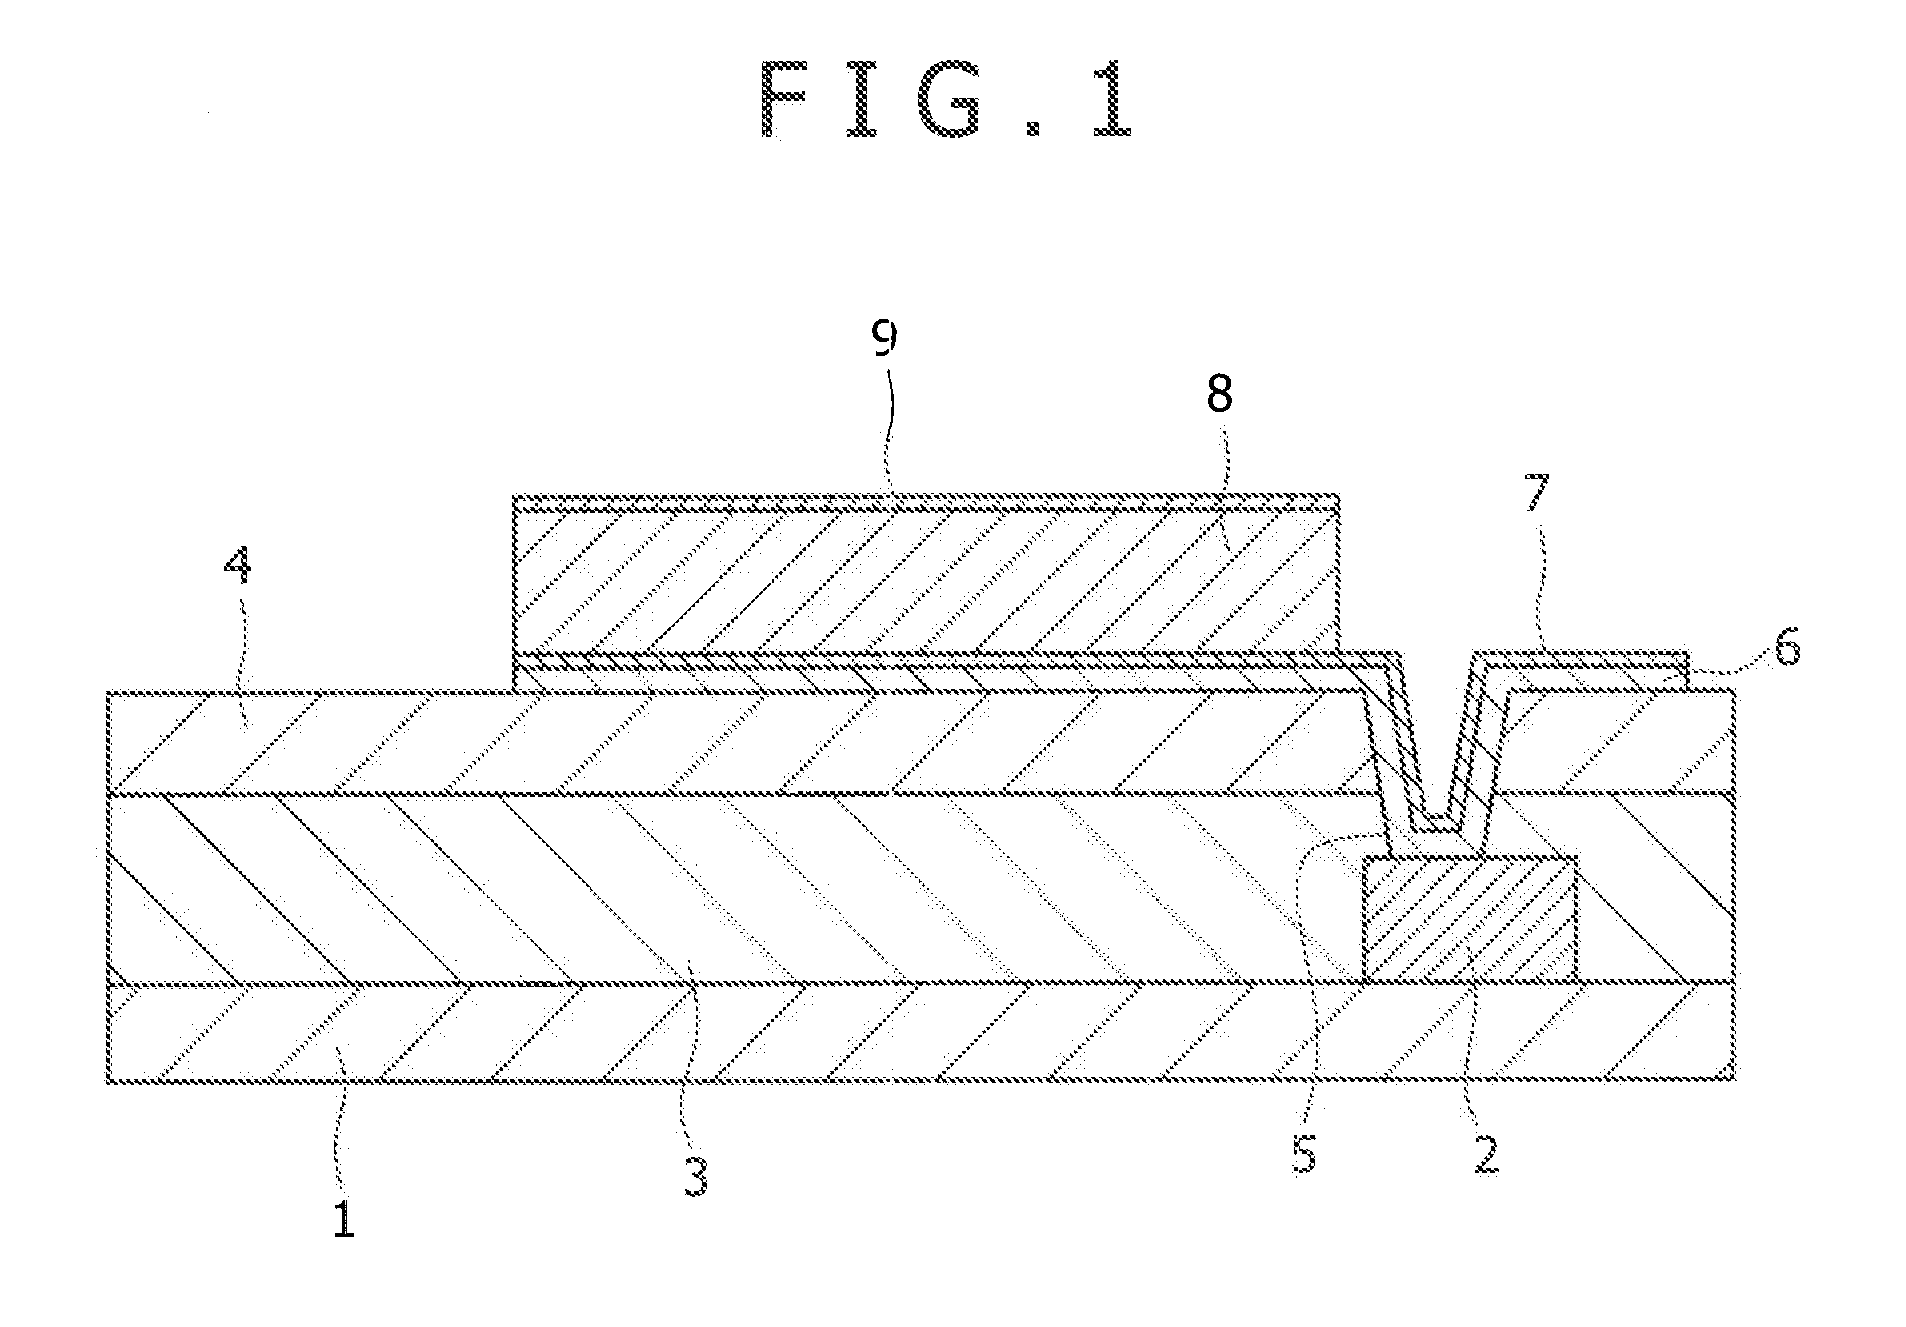 Reflective anode and wiring film for organic el display device